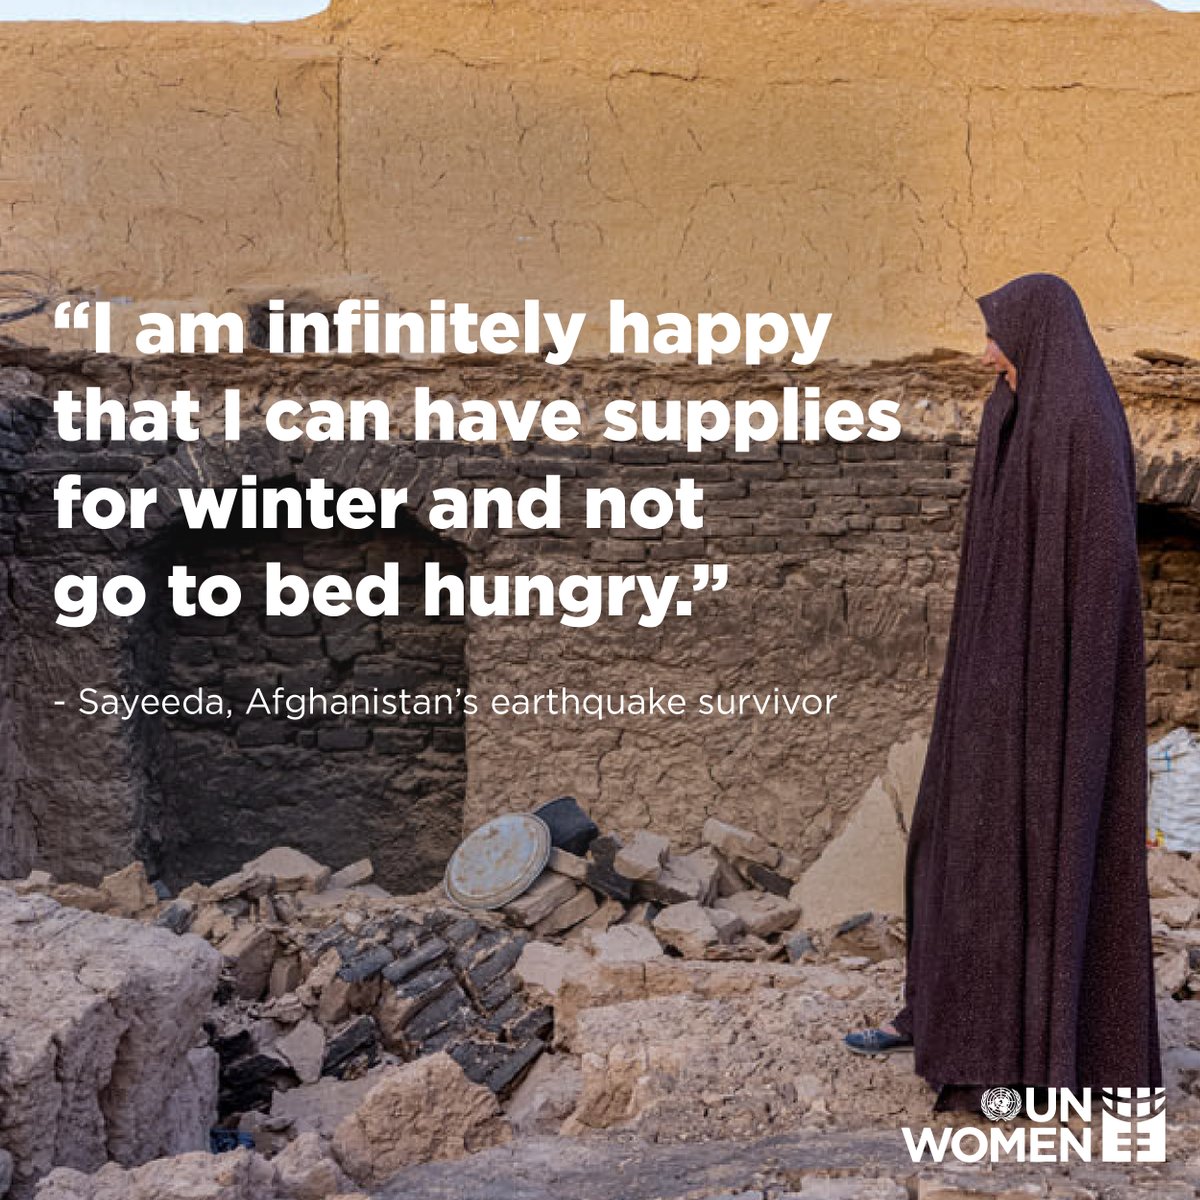 Sayeeda lives alone in a village in #Afghanistan and was badly injured during the recent earthquakes. Thanks to cash assistance from @unwomenafghan, she was able to survive the winter. Read her story: unwo.men/uWeY50QTXl2 @unafghanistan #InvestInWomen #CSW68